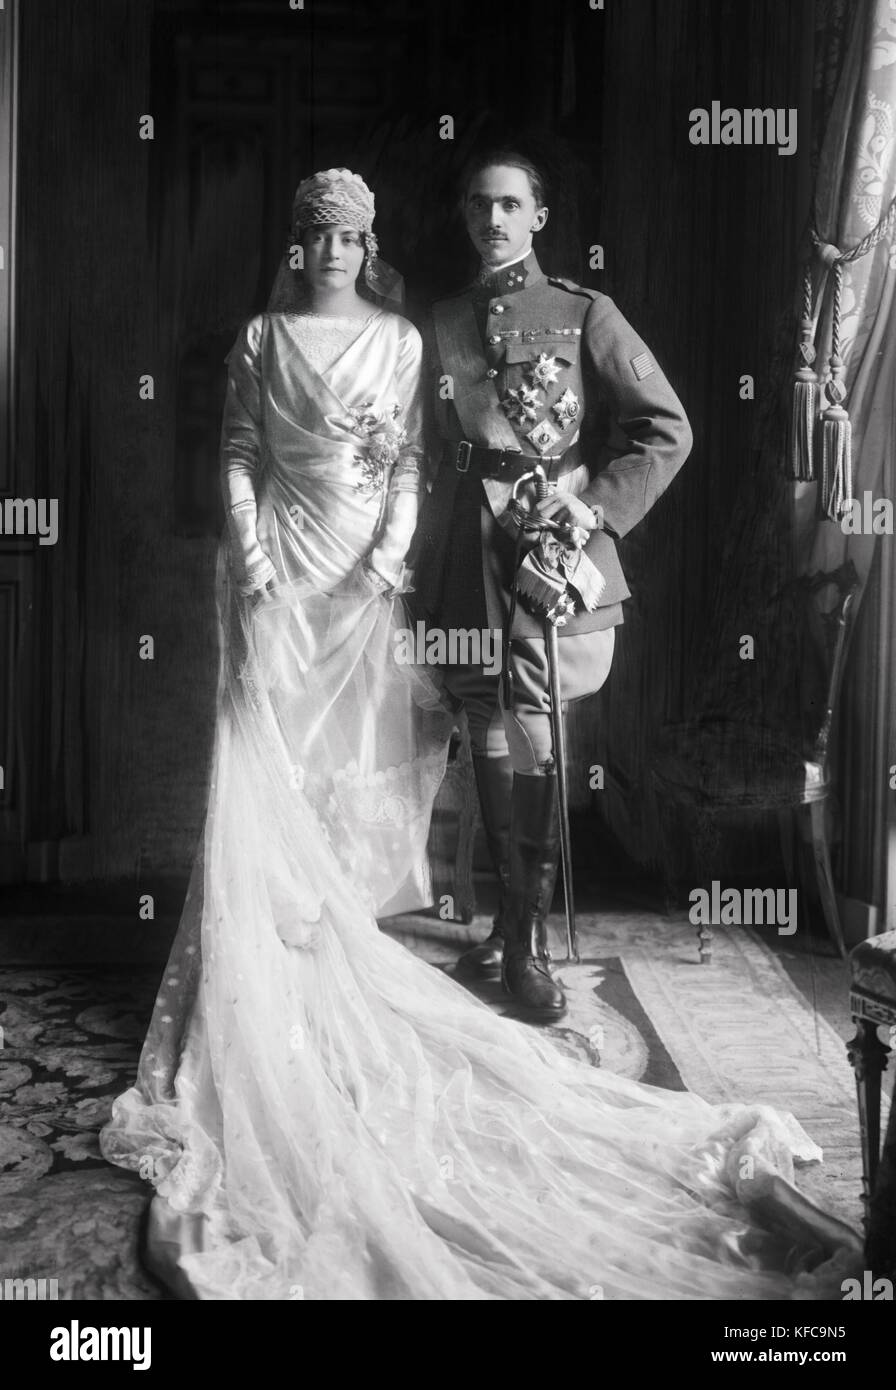 Prince Sixtus of Bourbon-Parma (1886-1934) and Hedwige de La Rochefoucauld (1896-1986) on their wedding day in Paris on November 12, 1919.  Boissonnas and Taponier Photo Photo12.com - Coll. Taponier Stock Photo